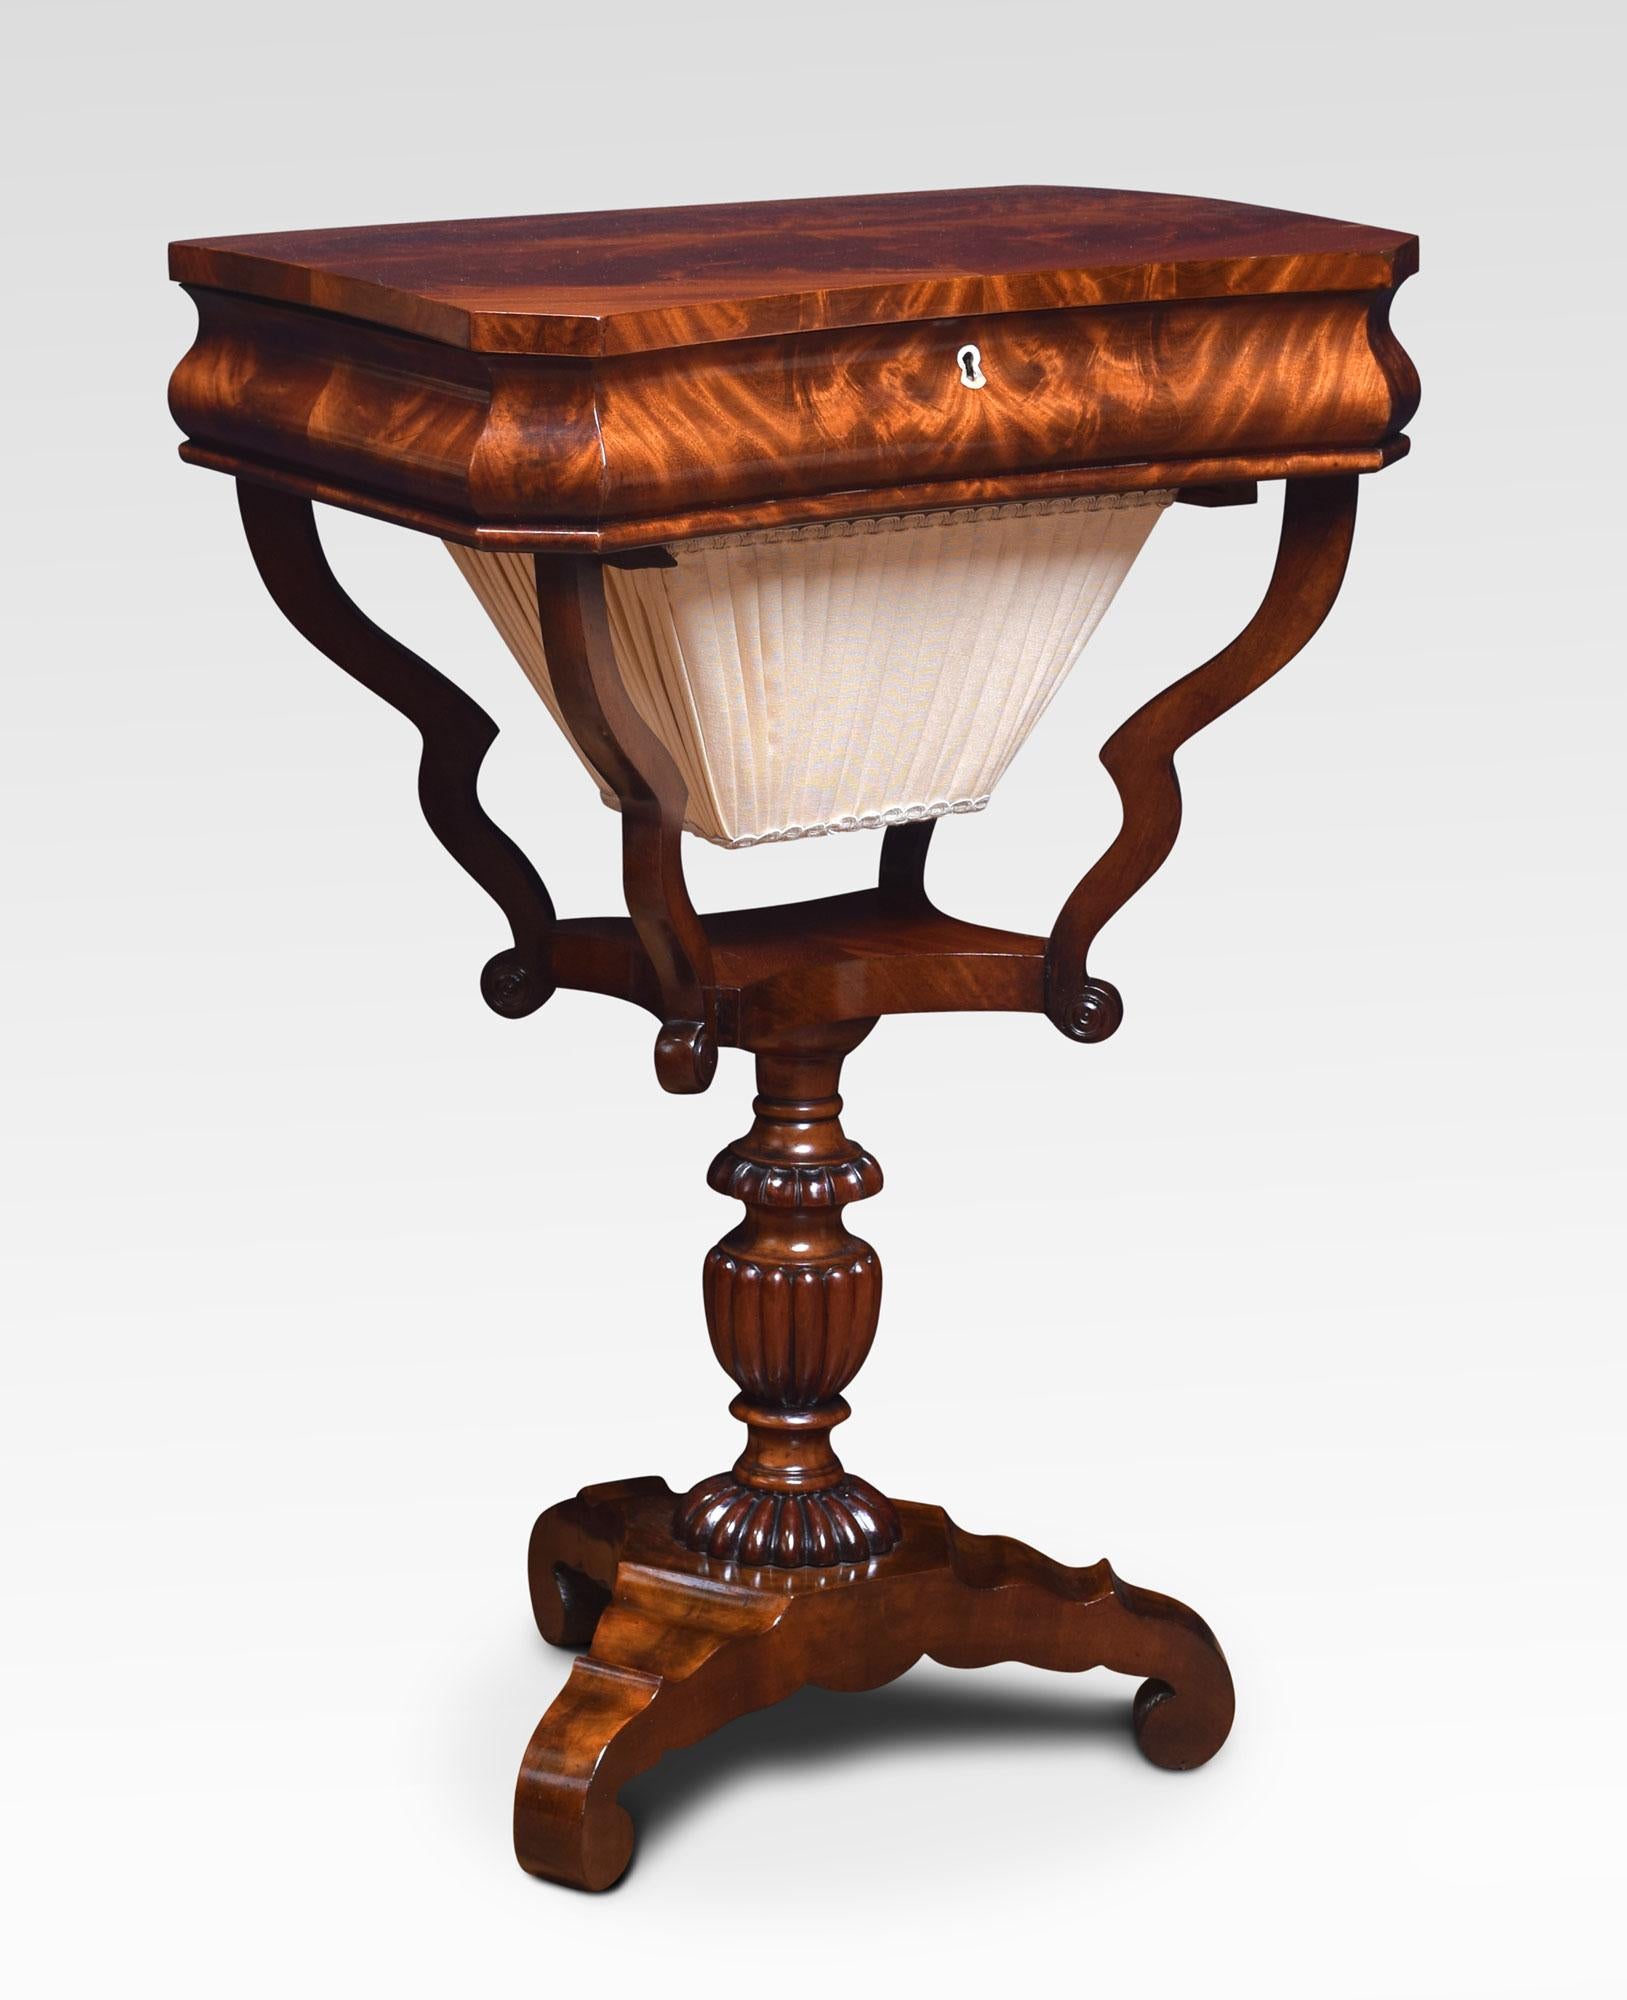 William IV mahogany work table, the inverted bow front top with hinged lifting lid opening to reveal lidded compartments above a shaped upholstered bag. Raised up on scrolling supports and turned lobed column. All raised up on tripod